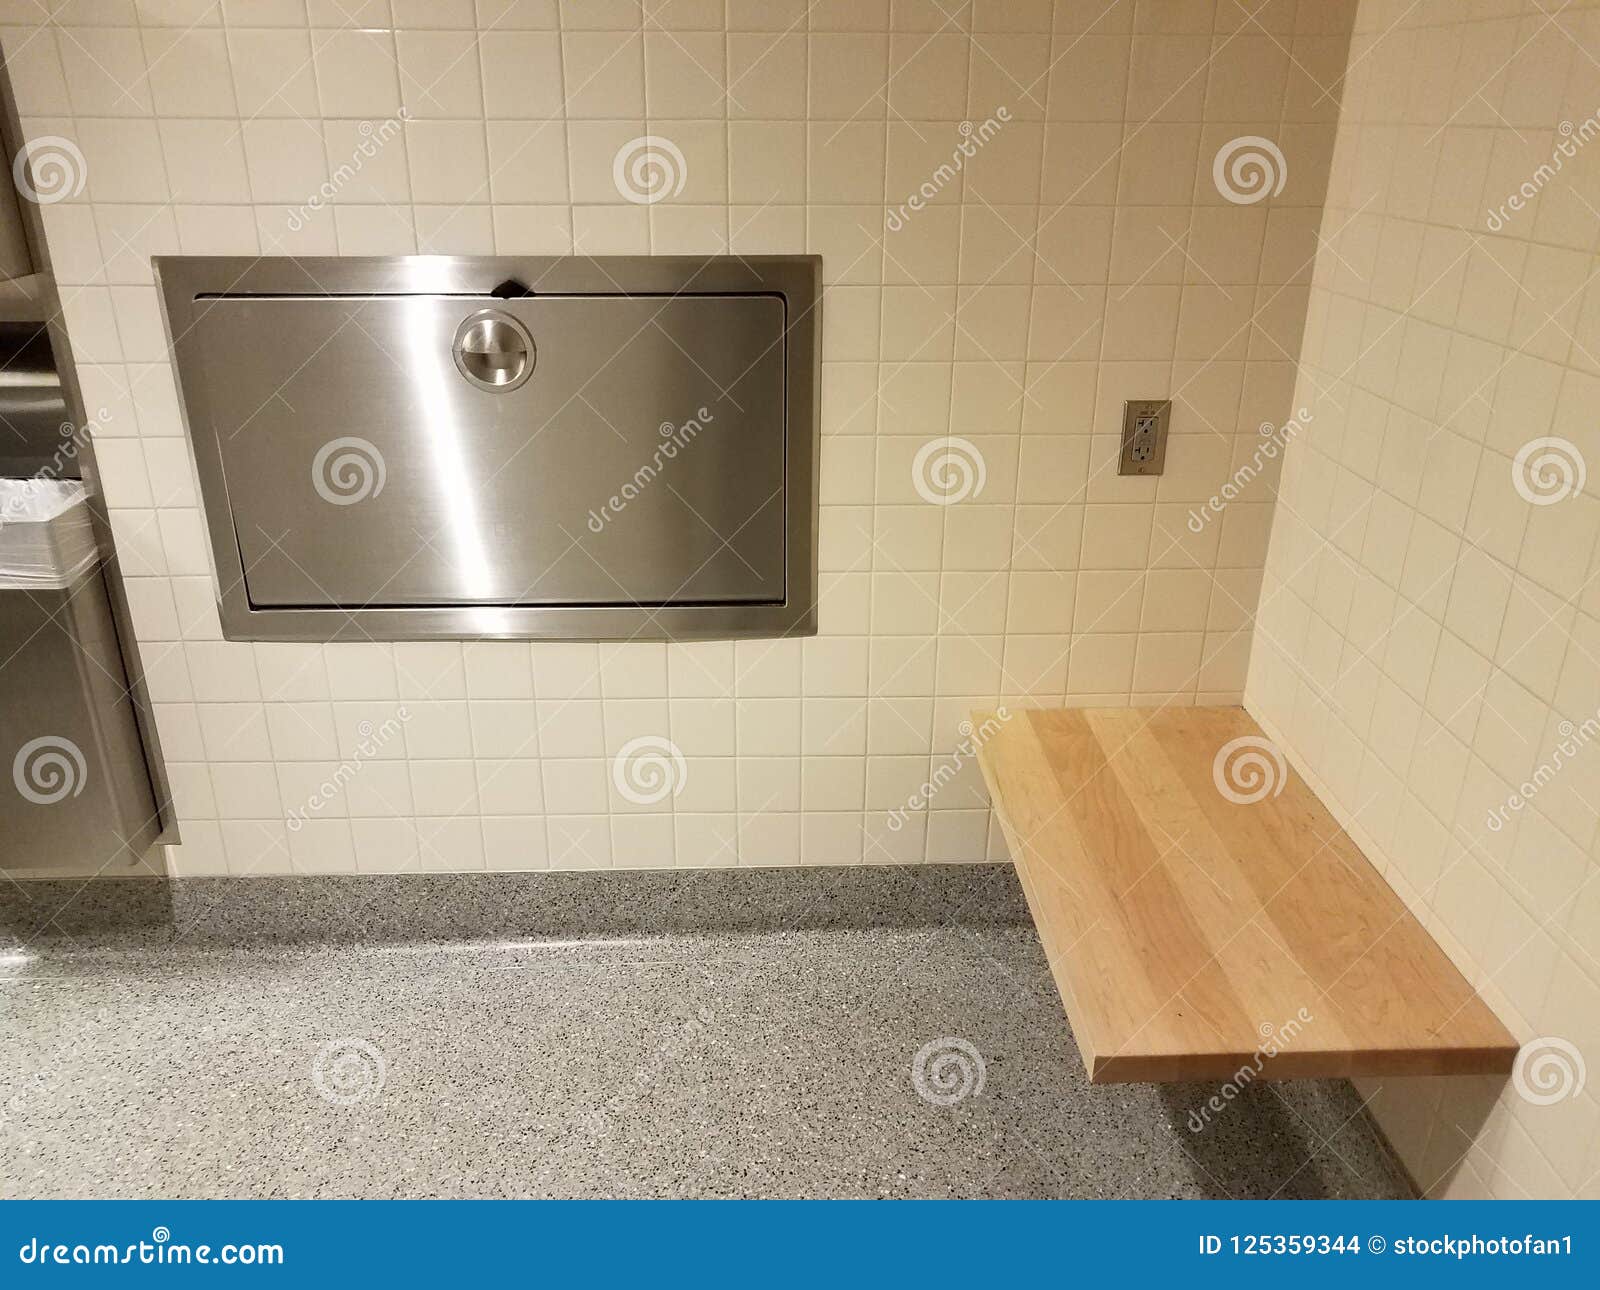 floor changing station